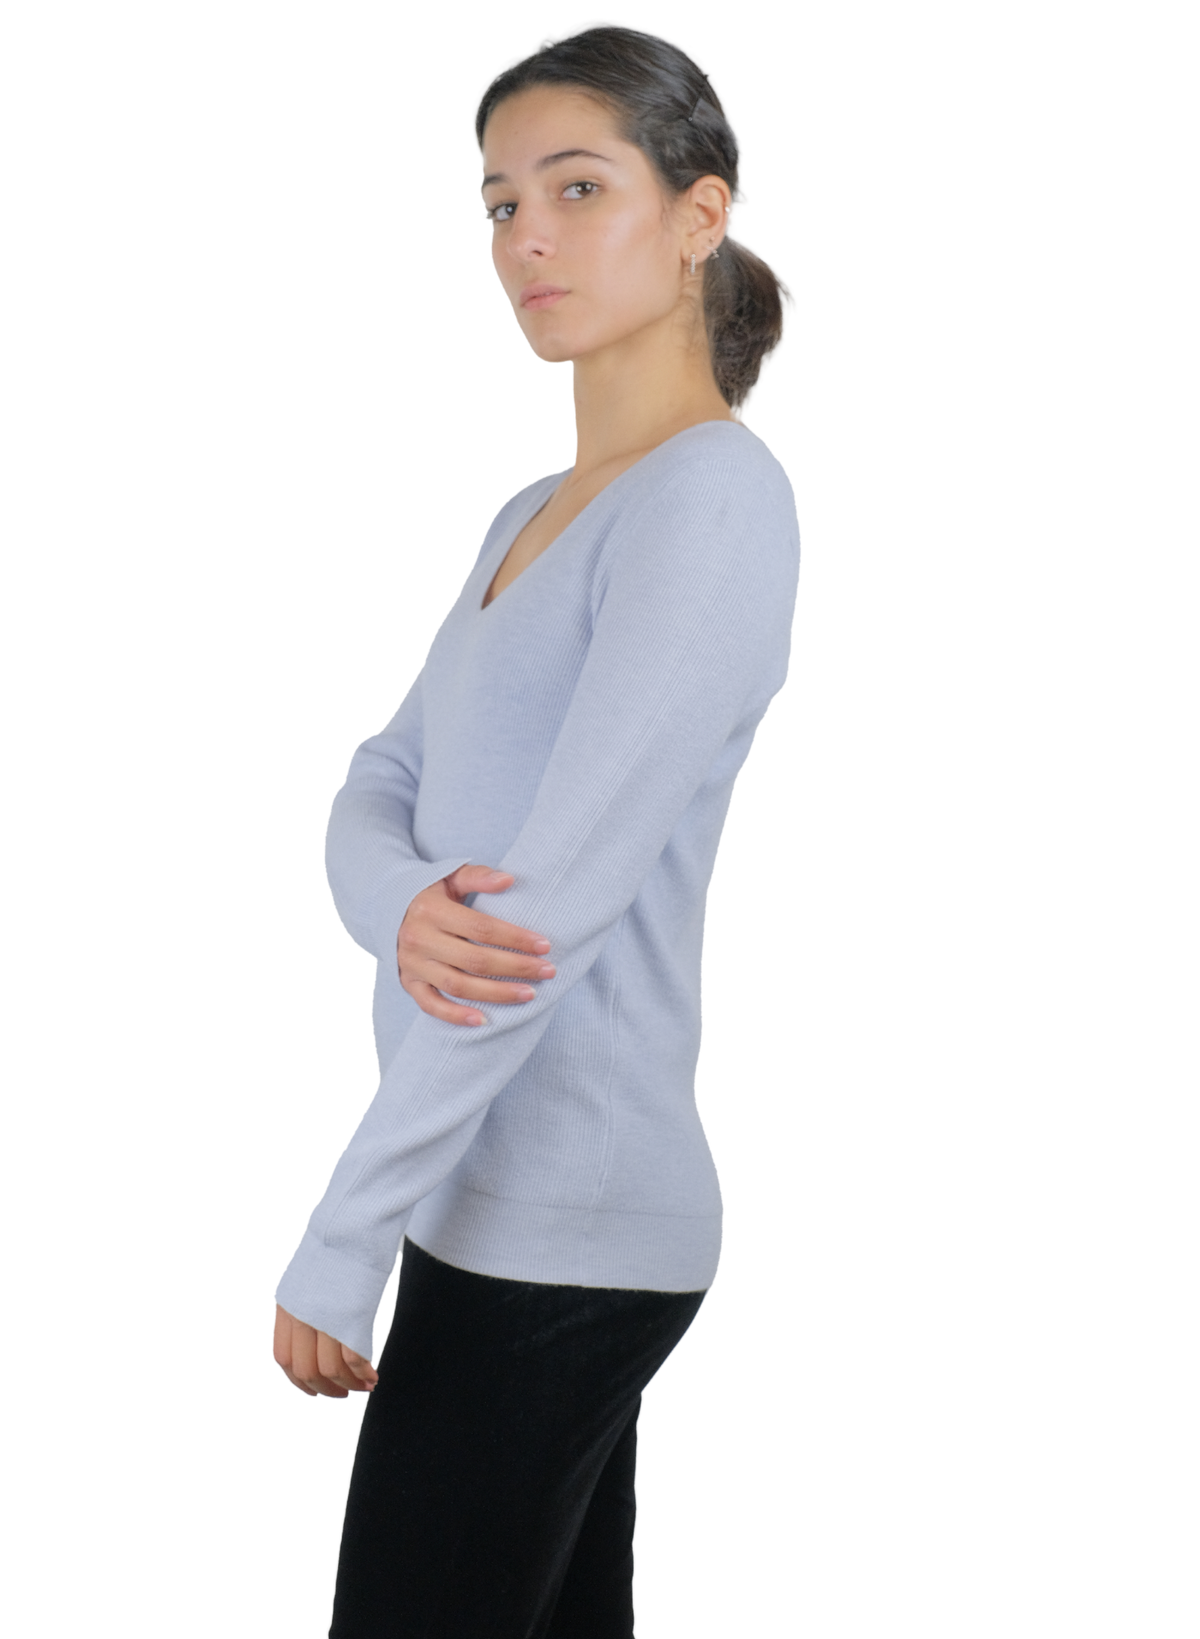 Women's shirt with long sleeves